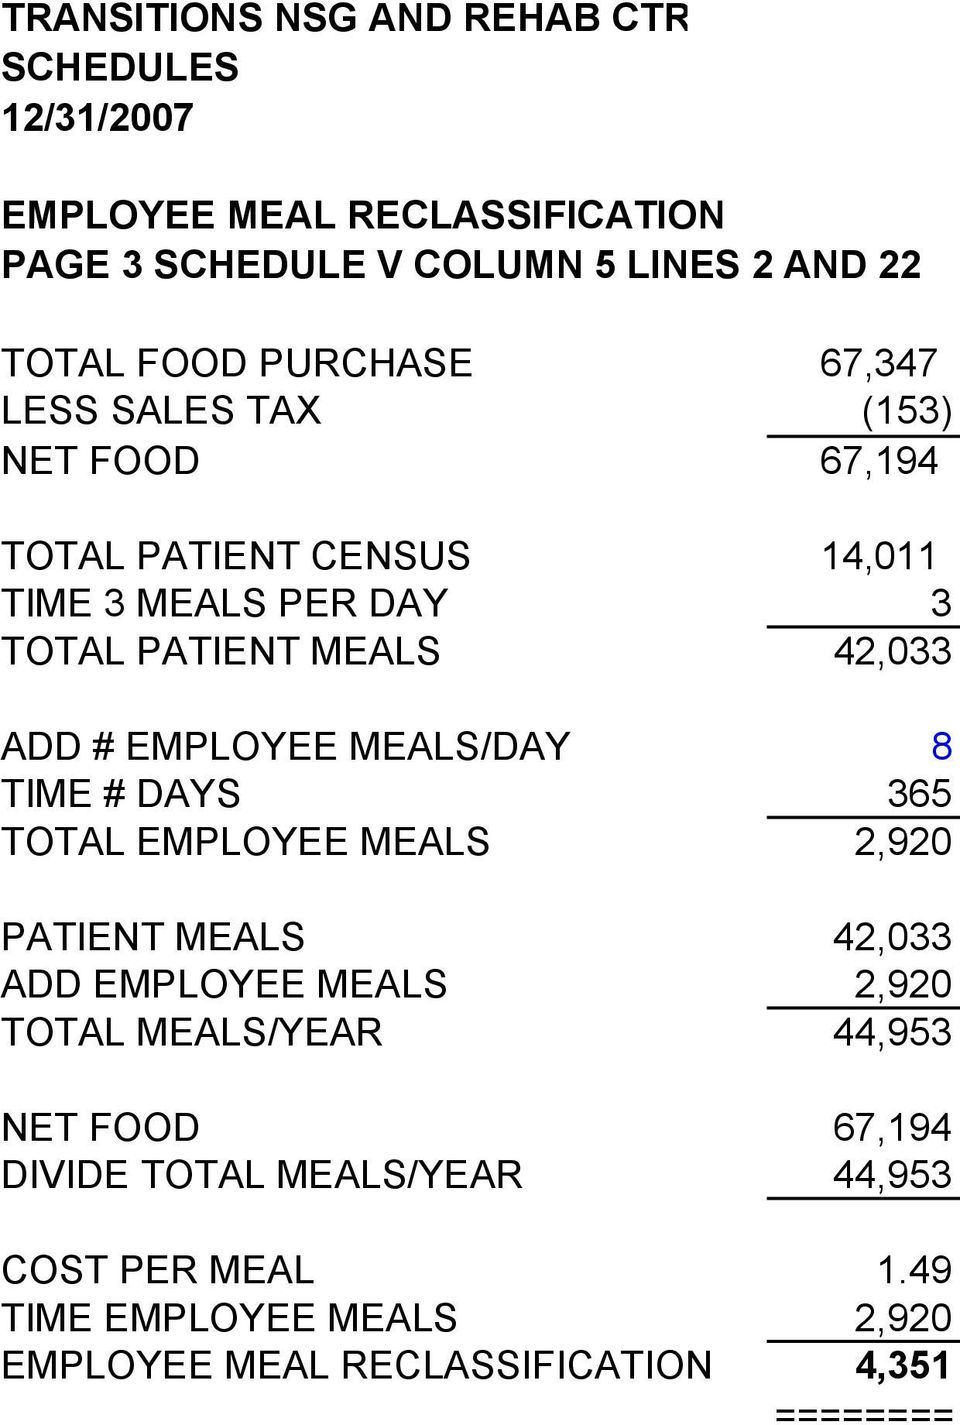 # EMPLOYEE MEALS/DAY 8 TIME # DAYS 365 TOTAL EMPLOYEE MEALS 2,920 PATIENT MEALS 42,033 ADD EMPLOYEE MEALS 2,920 TOTAL MEALS/YEAR 44,953